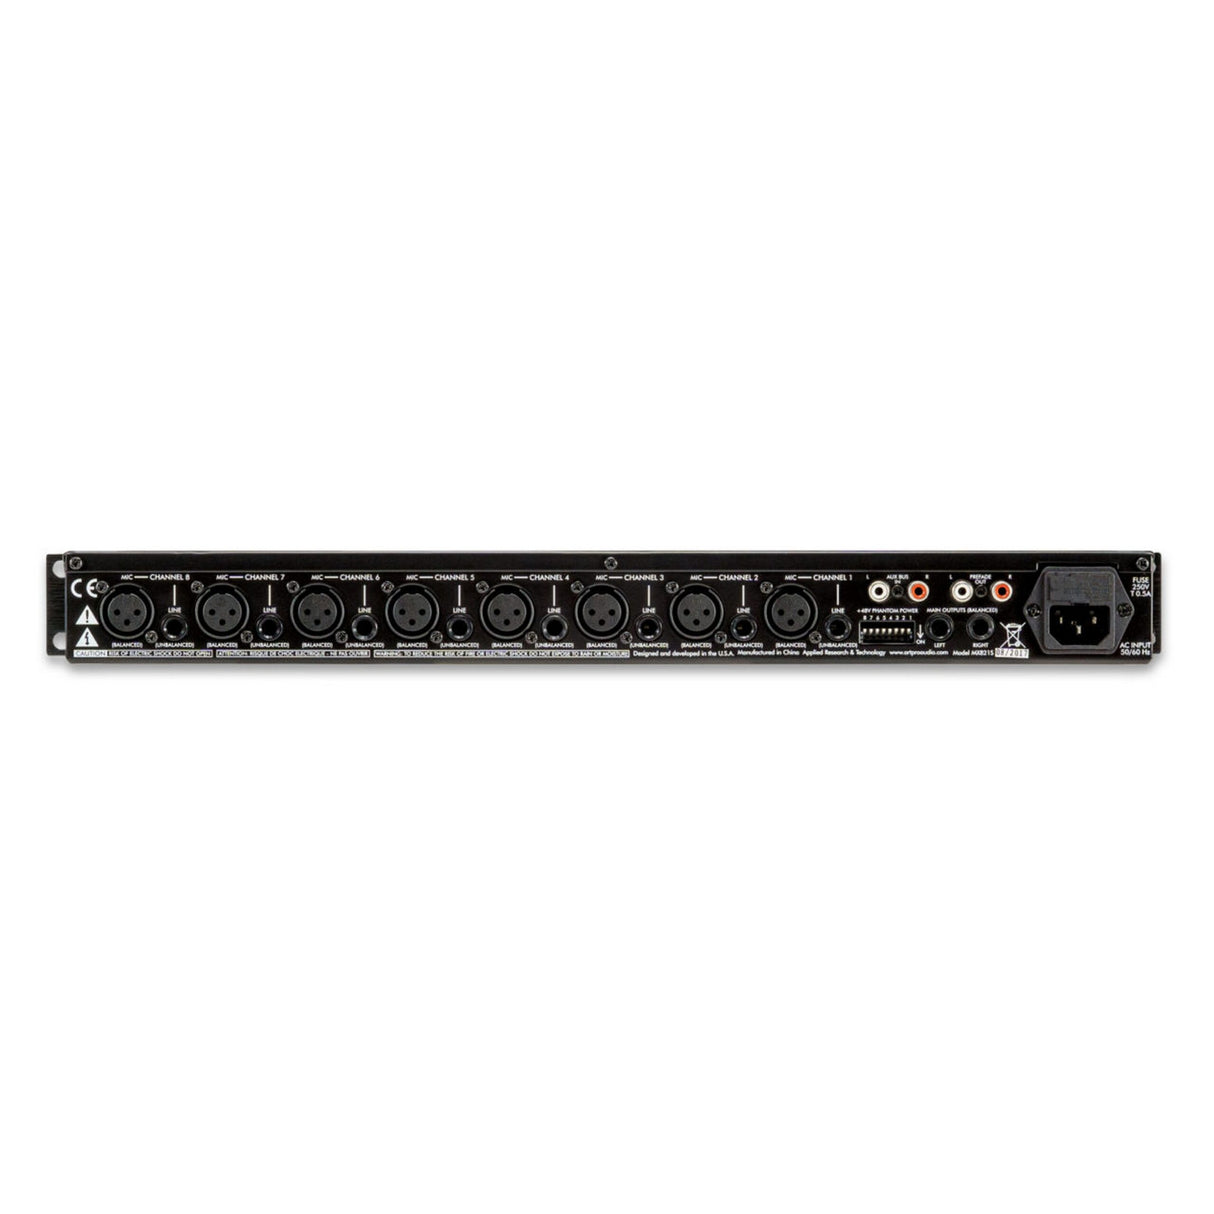 ART MX821S 8-Channel Mic/Line Mixer with Stereo Outputs